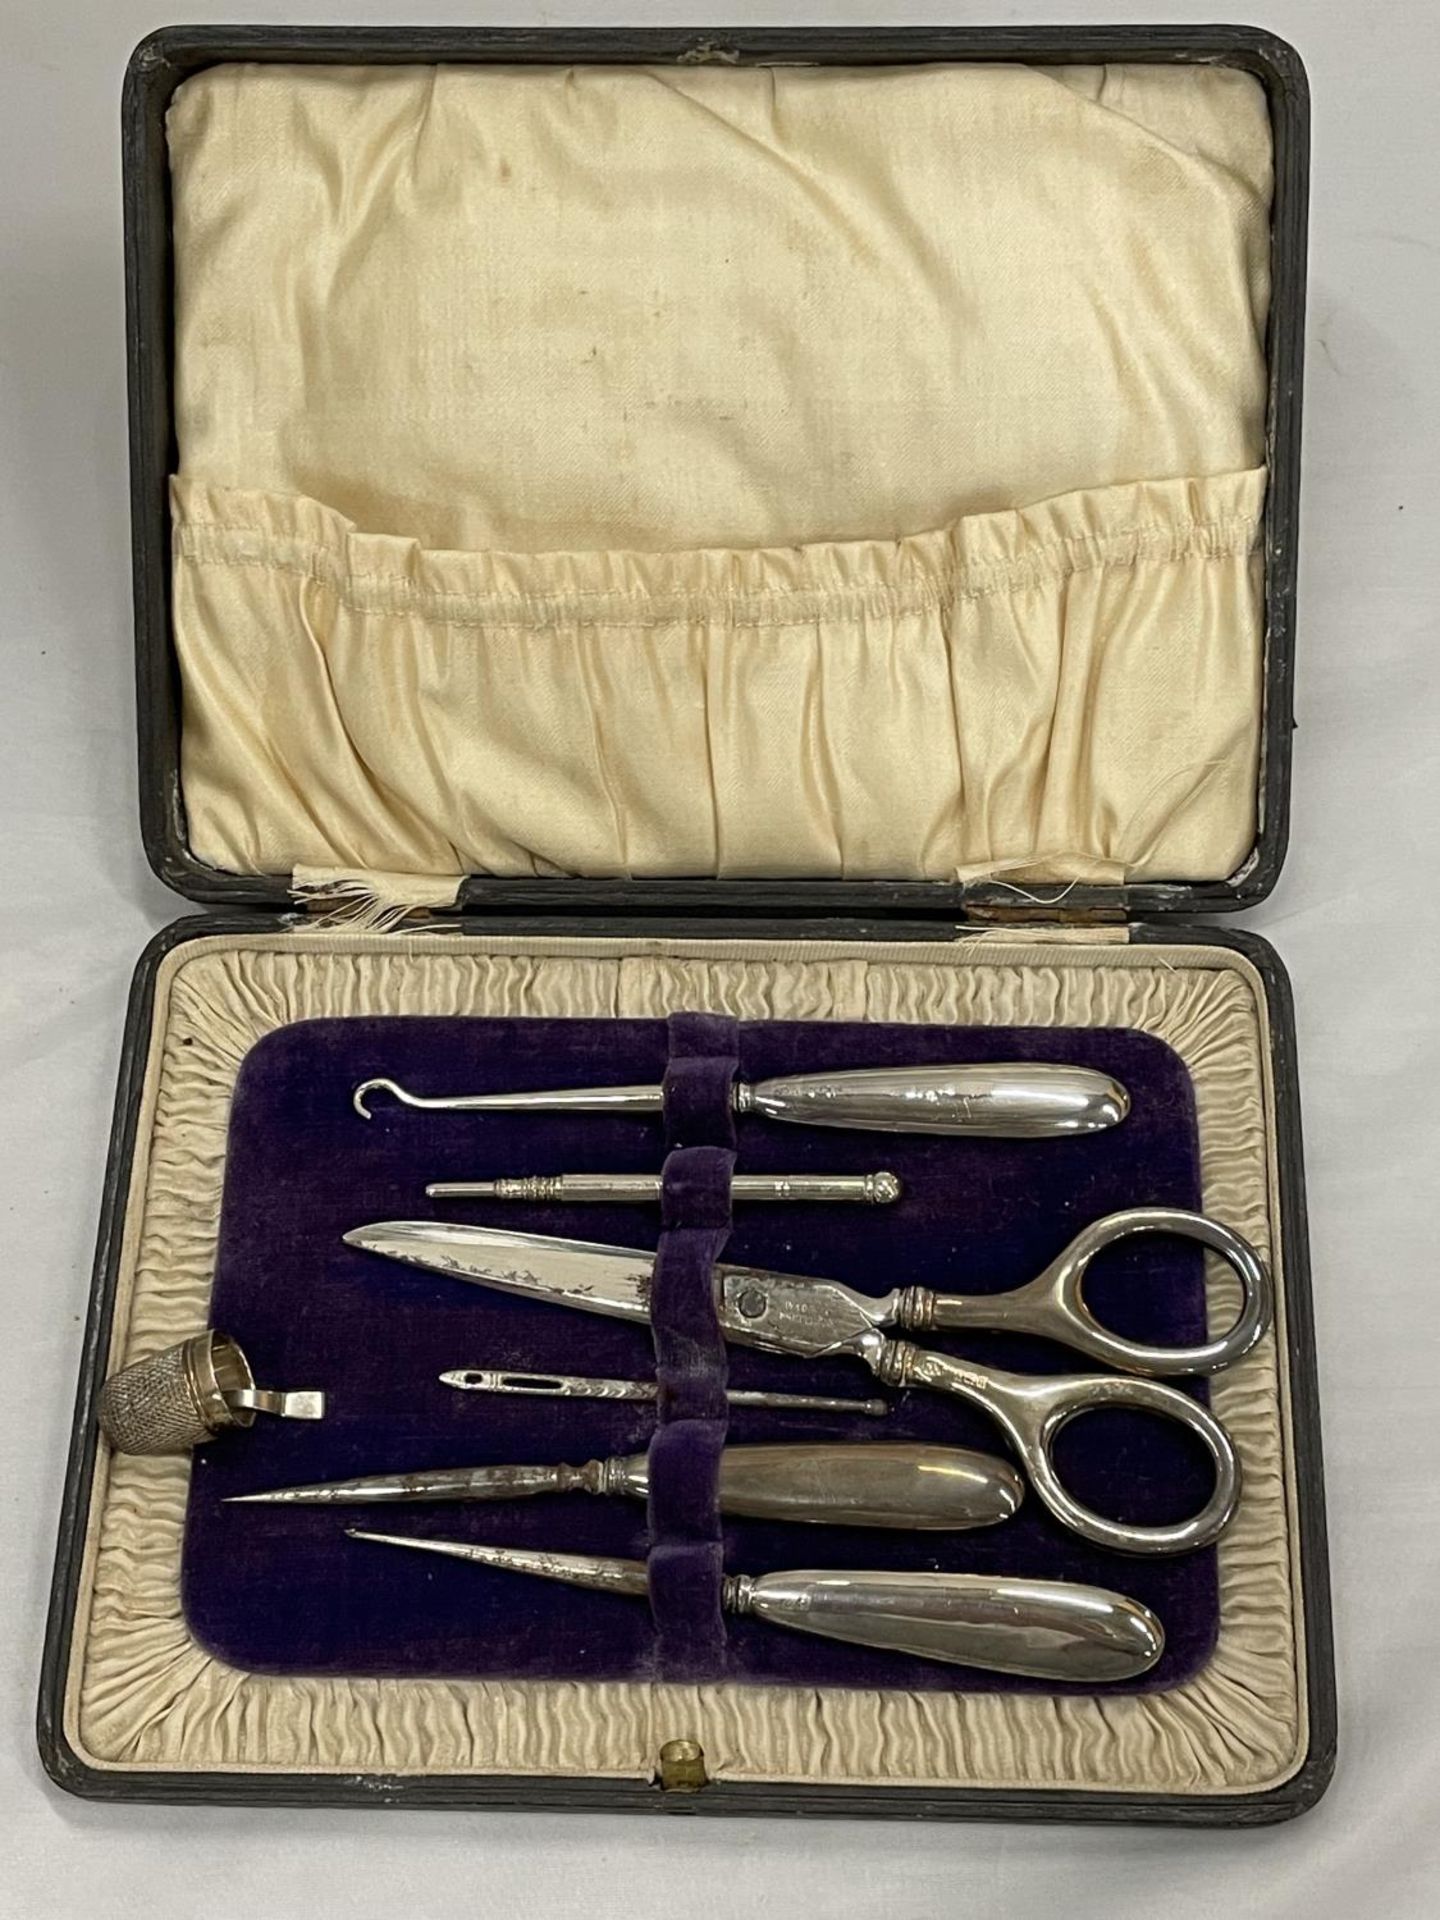 A HALLMARKED BIRMINGHAM SILVER TRAVEL SET TO INCLUDE SCISSORS, BUTTON HOOK, THIMBLE ETC IN A CASE